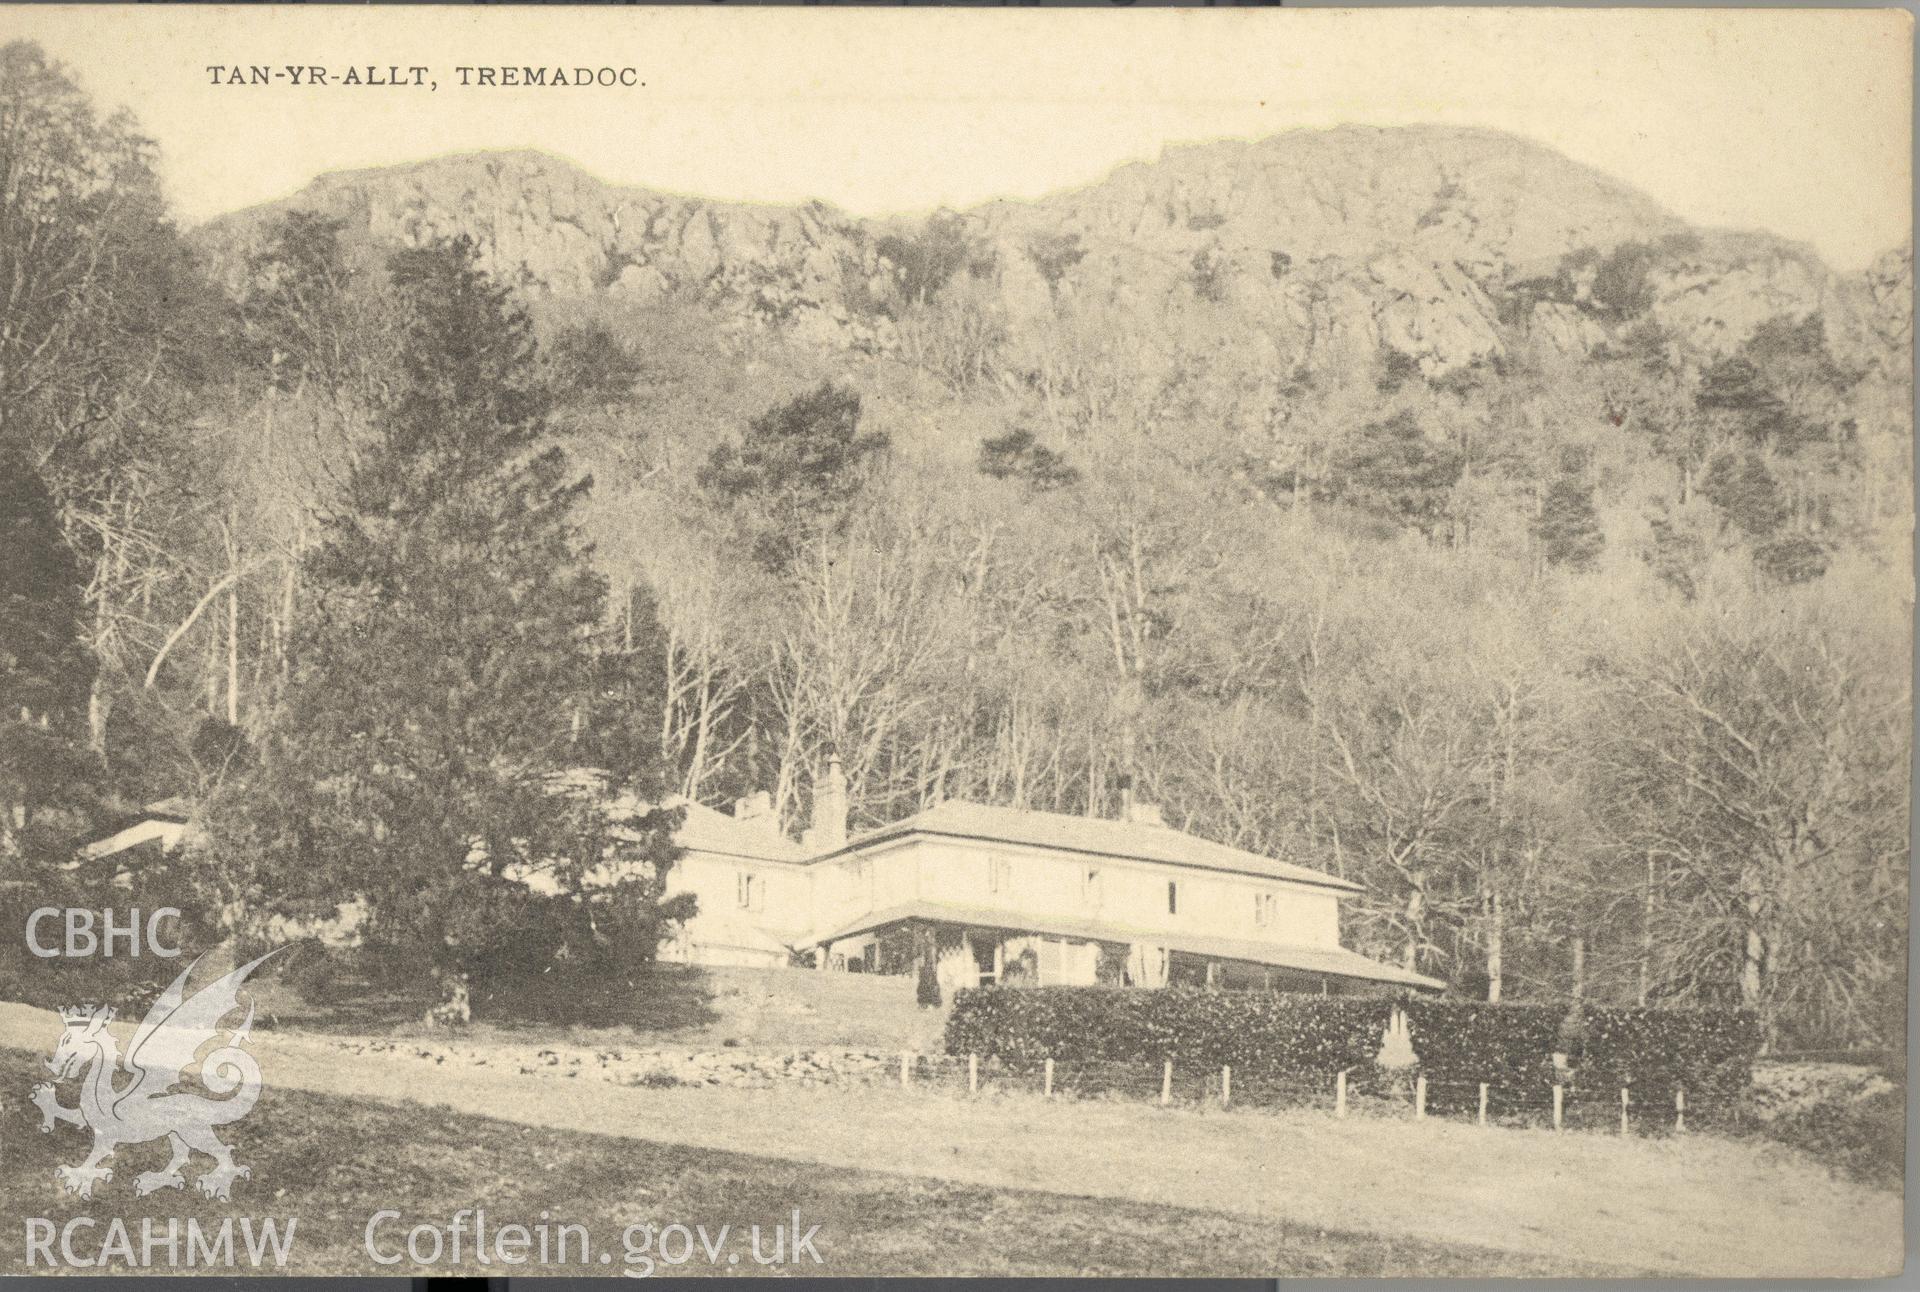 Digitised postcard image of Tan-yr-allt, Tremadog, the Wykeham Collection. Produced by Parks and Gardens Data Services, from an original item in the Peter Davis Collection at Parks and Gardens UK. We hold only web-resolution images of this collection, suitable for viewing on screen and for research purposes only. We do not hold the original images, or publication quality scans.